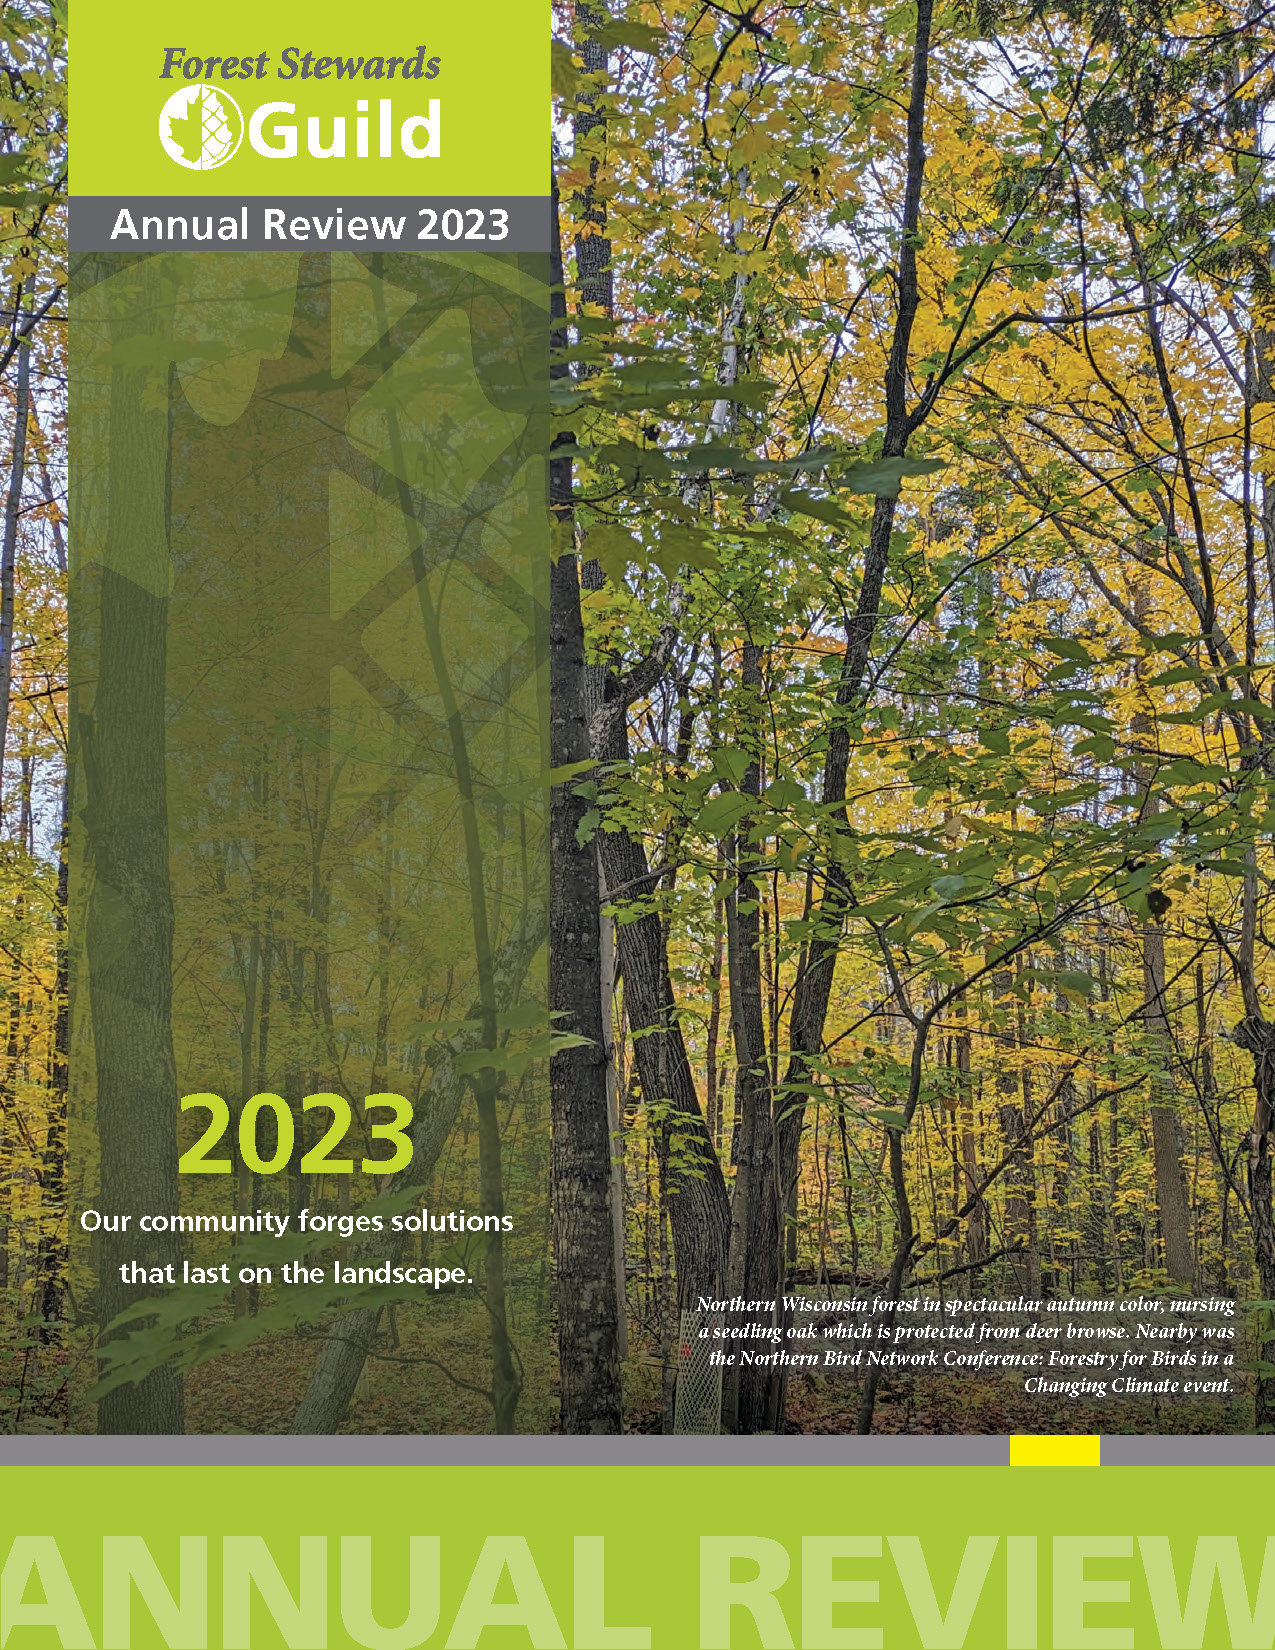 A cover image of the 2023 Annual Review